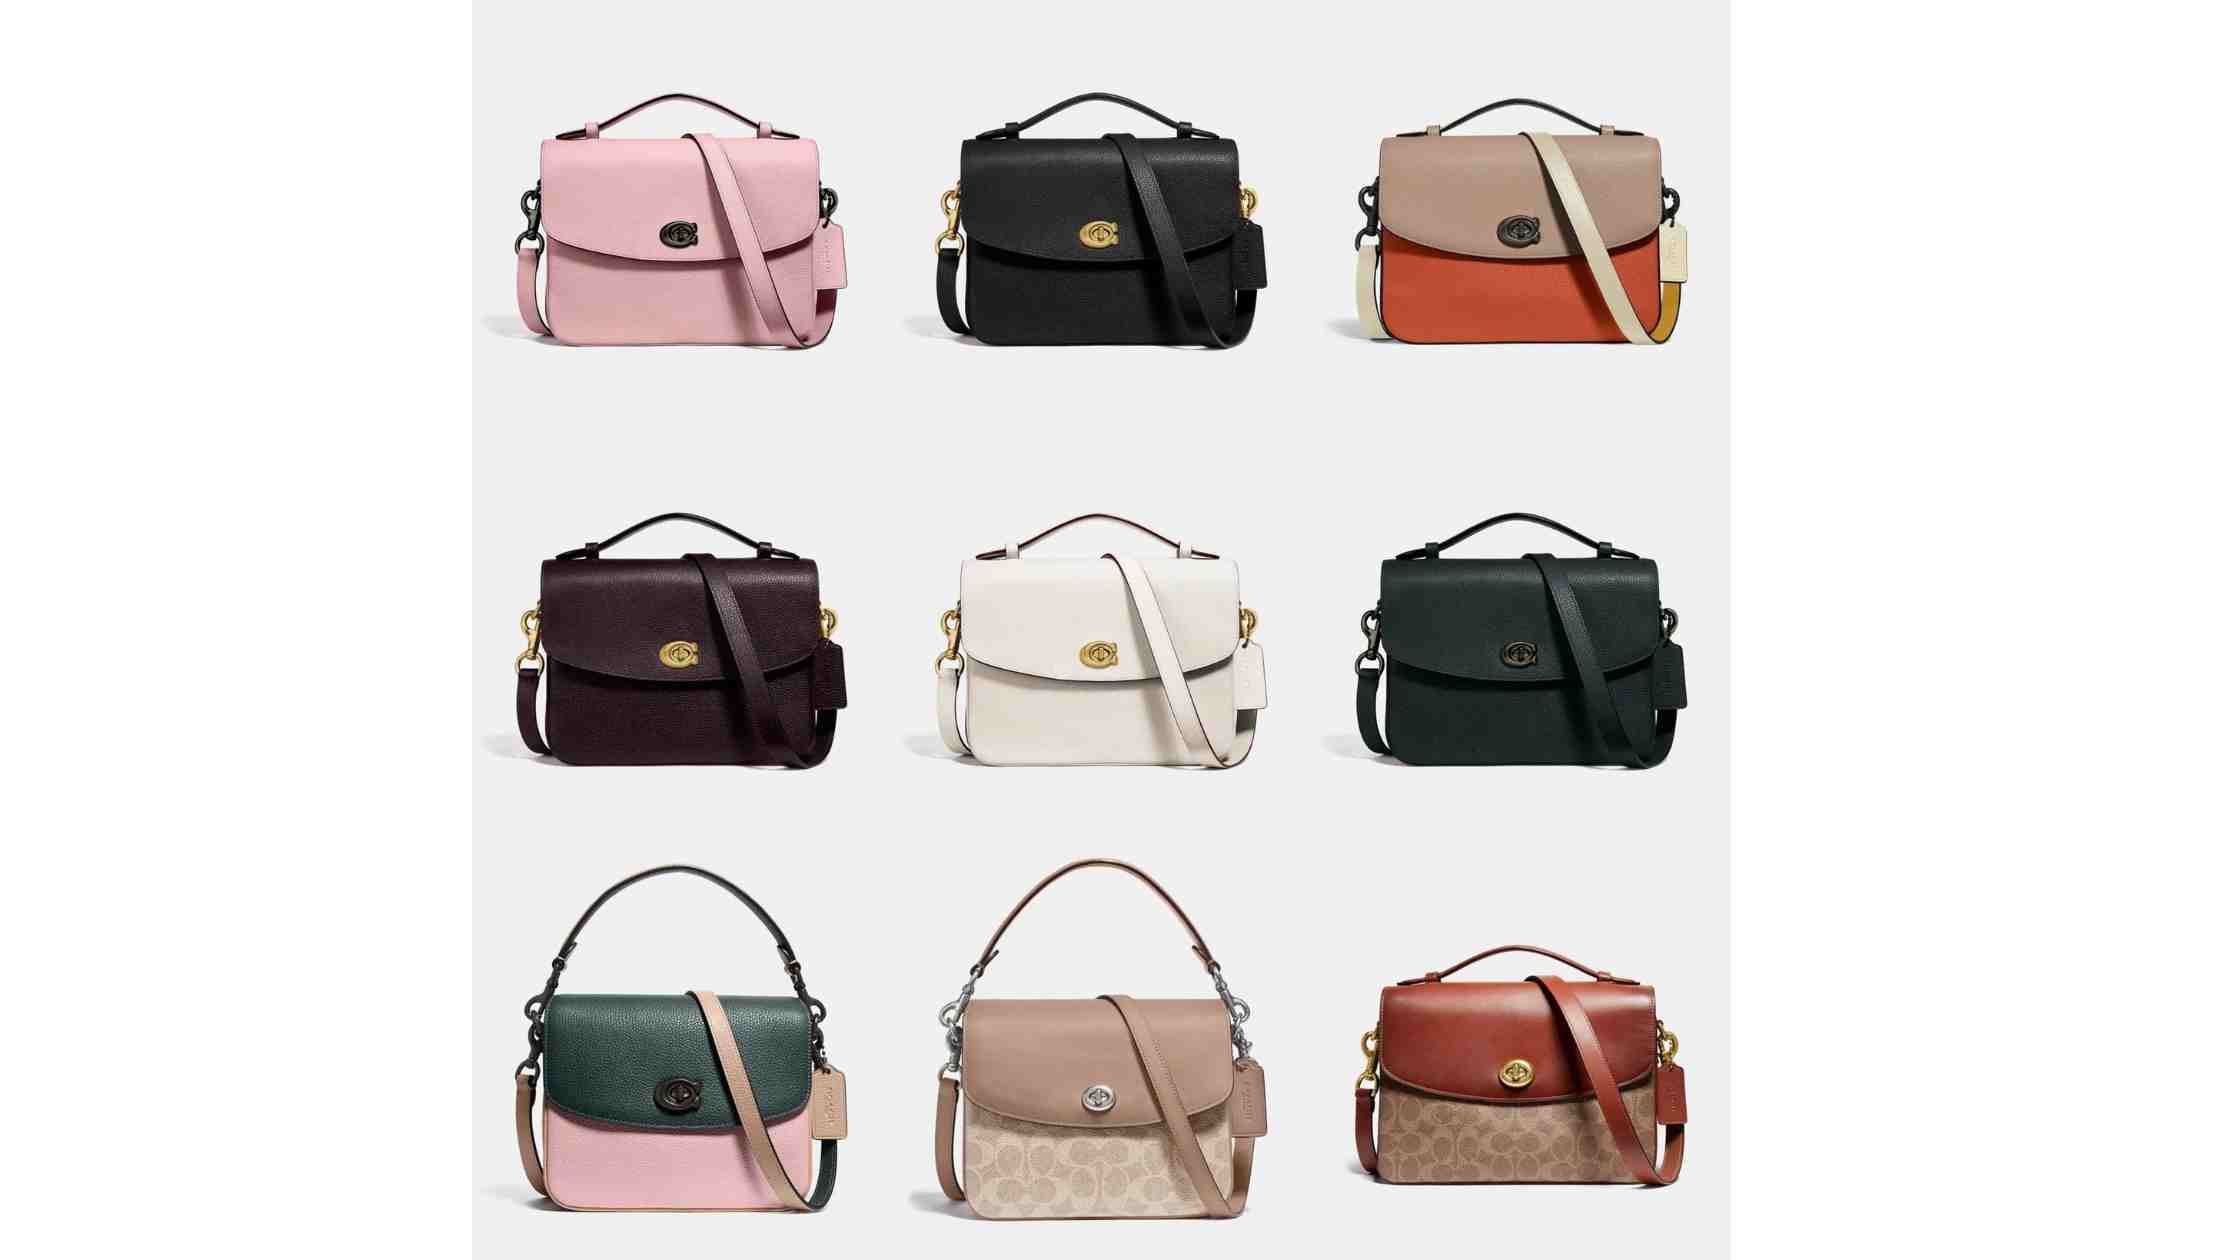 Coach Cassie Discontinued - Is It come back in 2023?